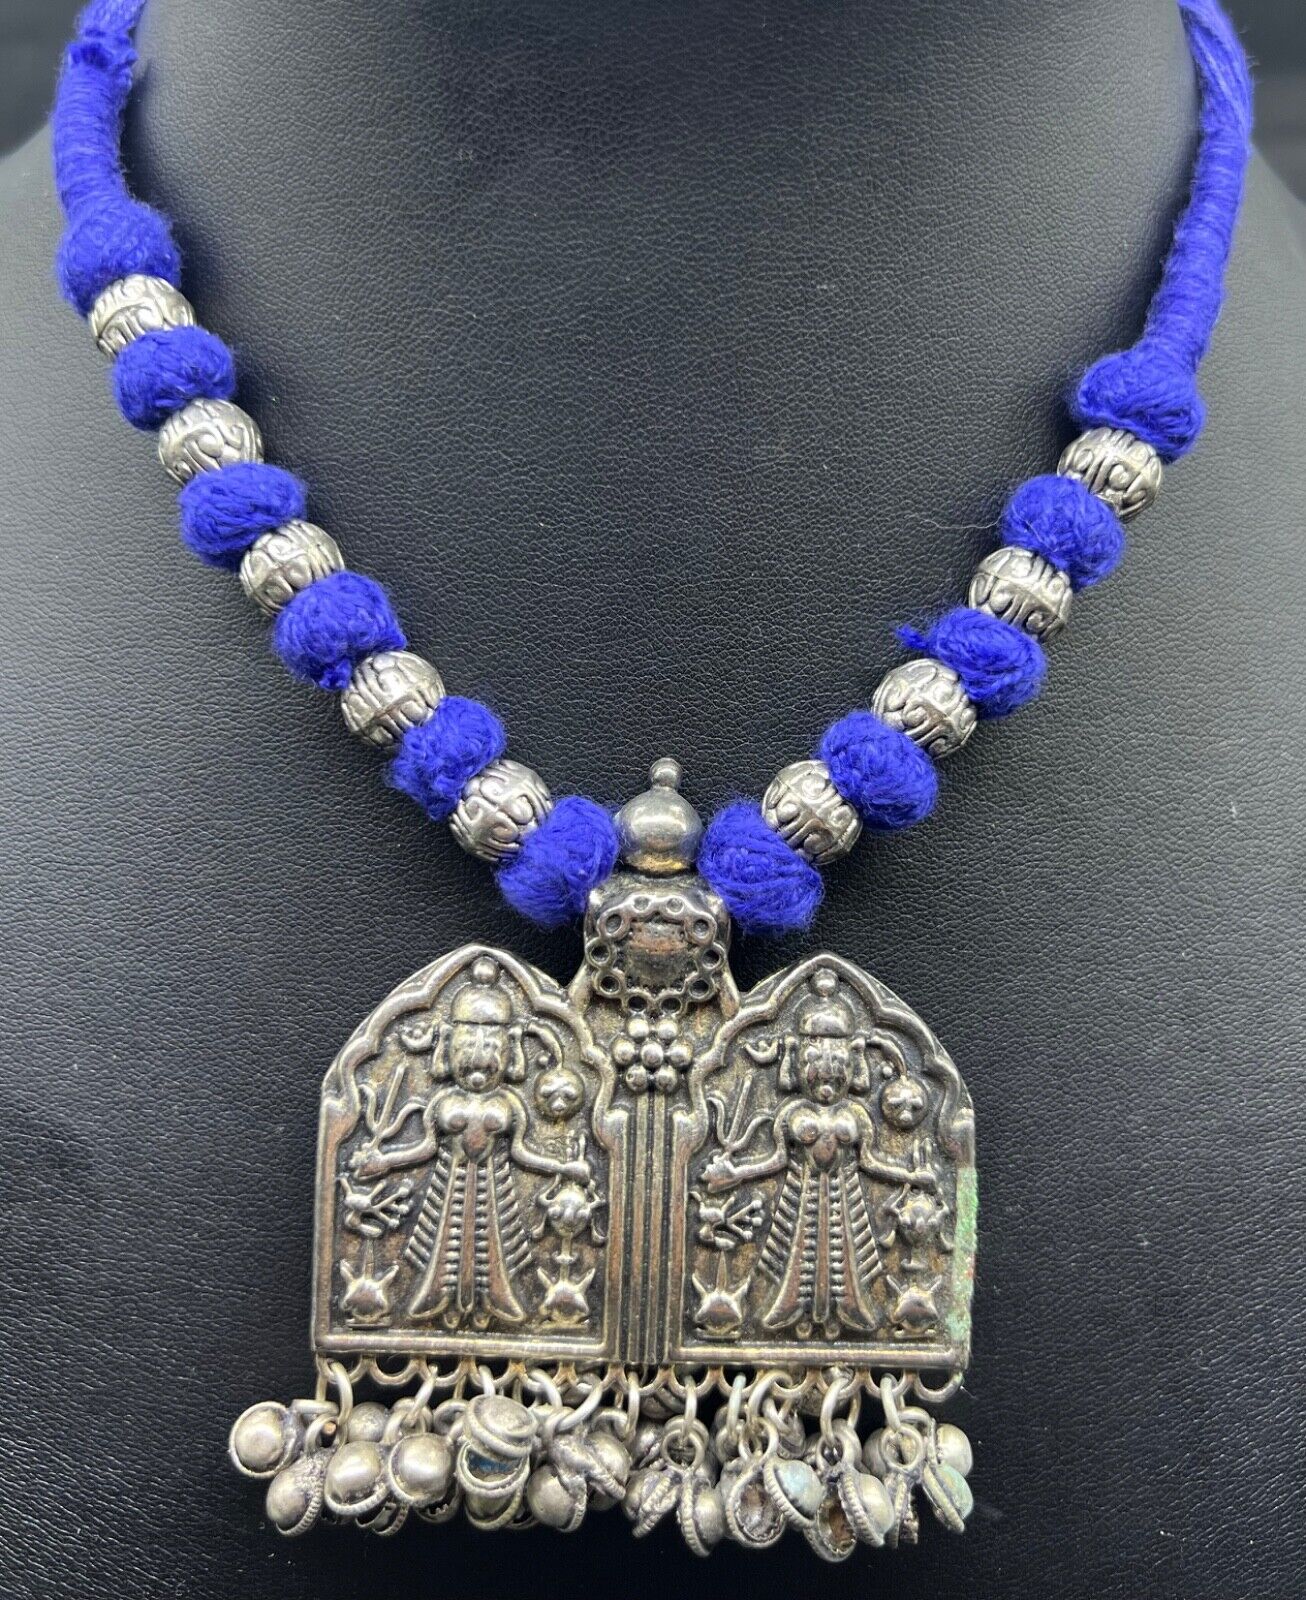 Stunning Old Antique Vintage Jewelry Buddha Statues Craved Mixed Slivered Neckle